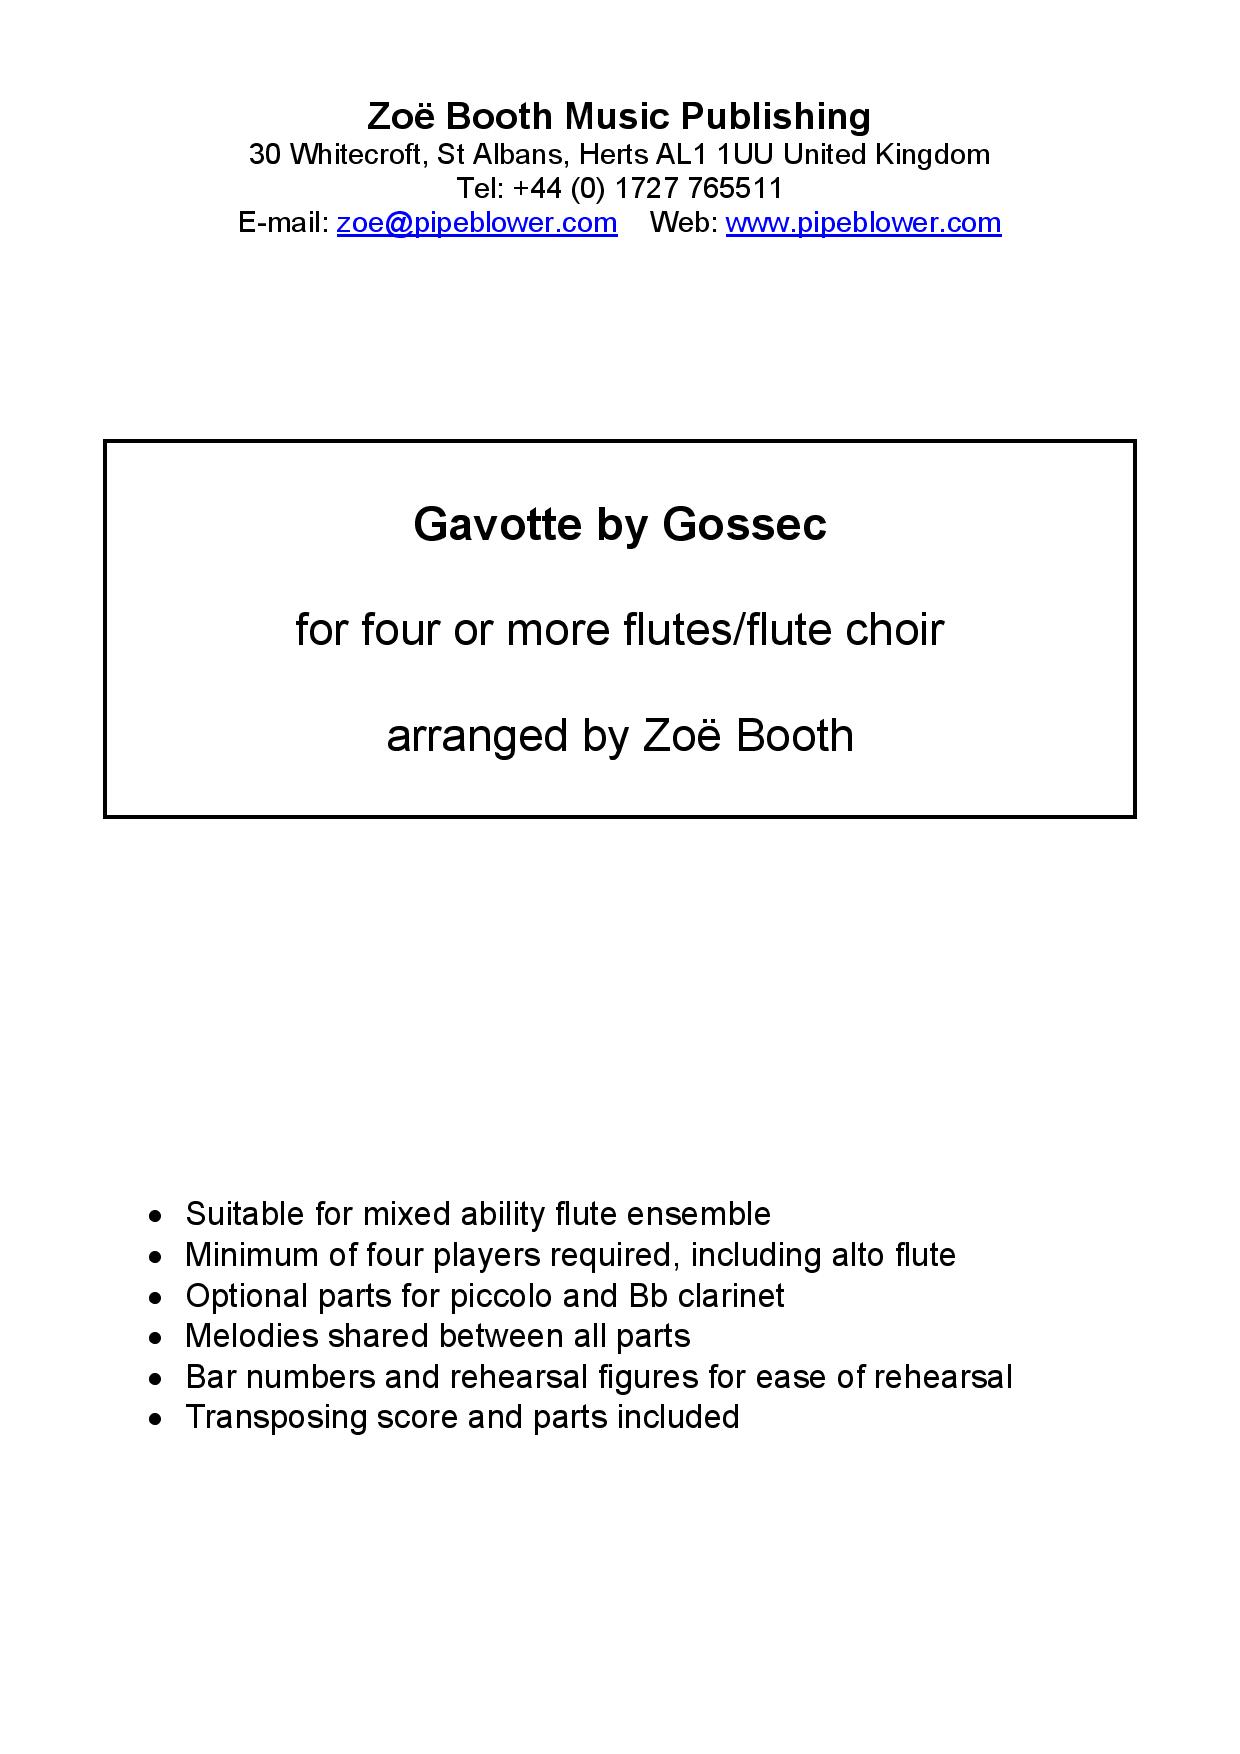 Gavotte by Gossec,  Arranged by Zoë Booth for three or more flutes/flute choir